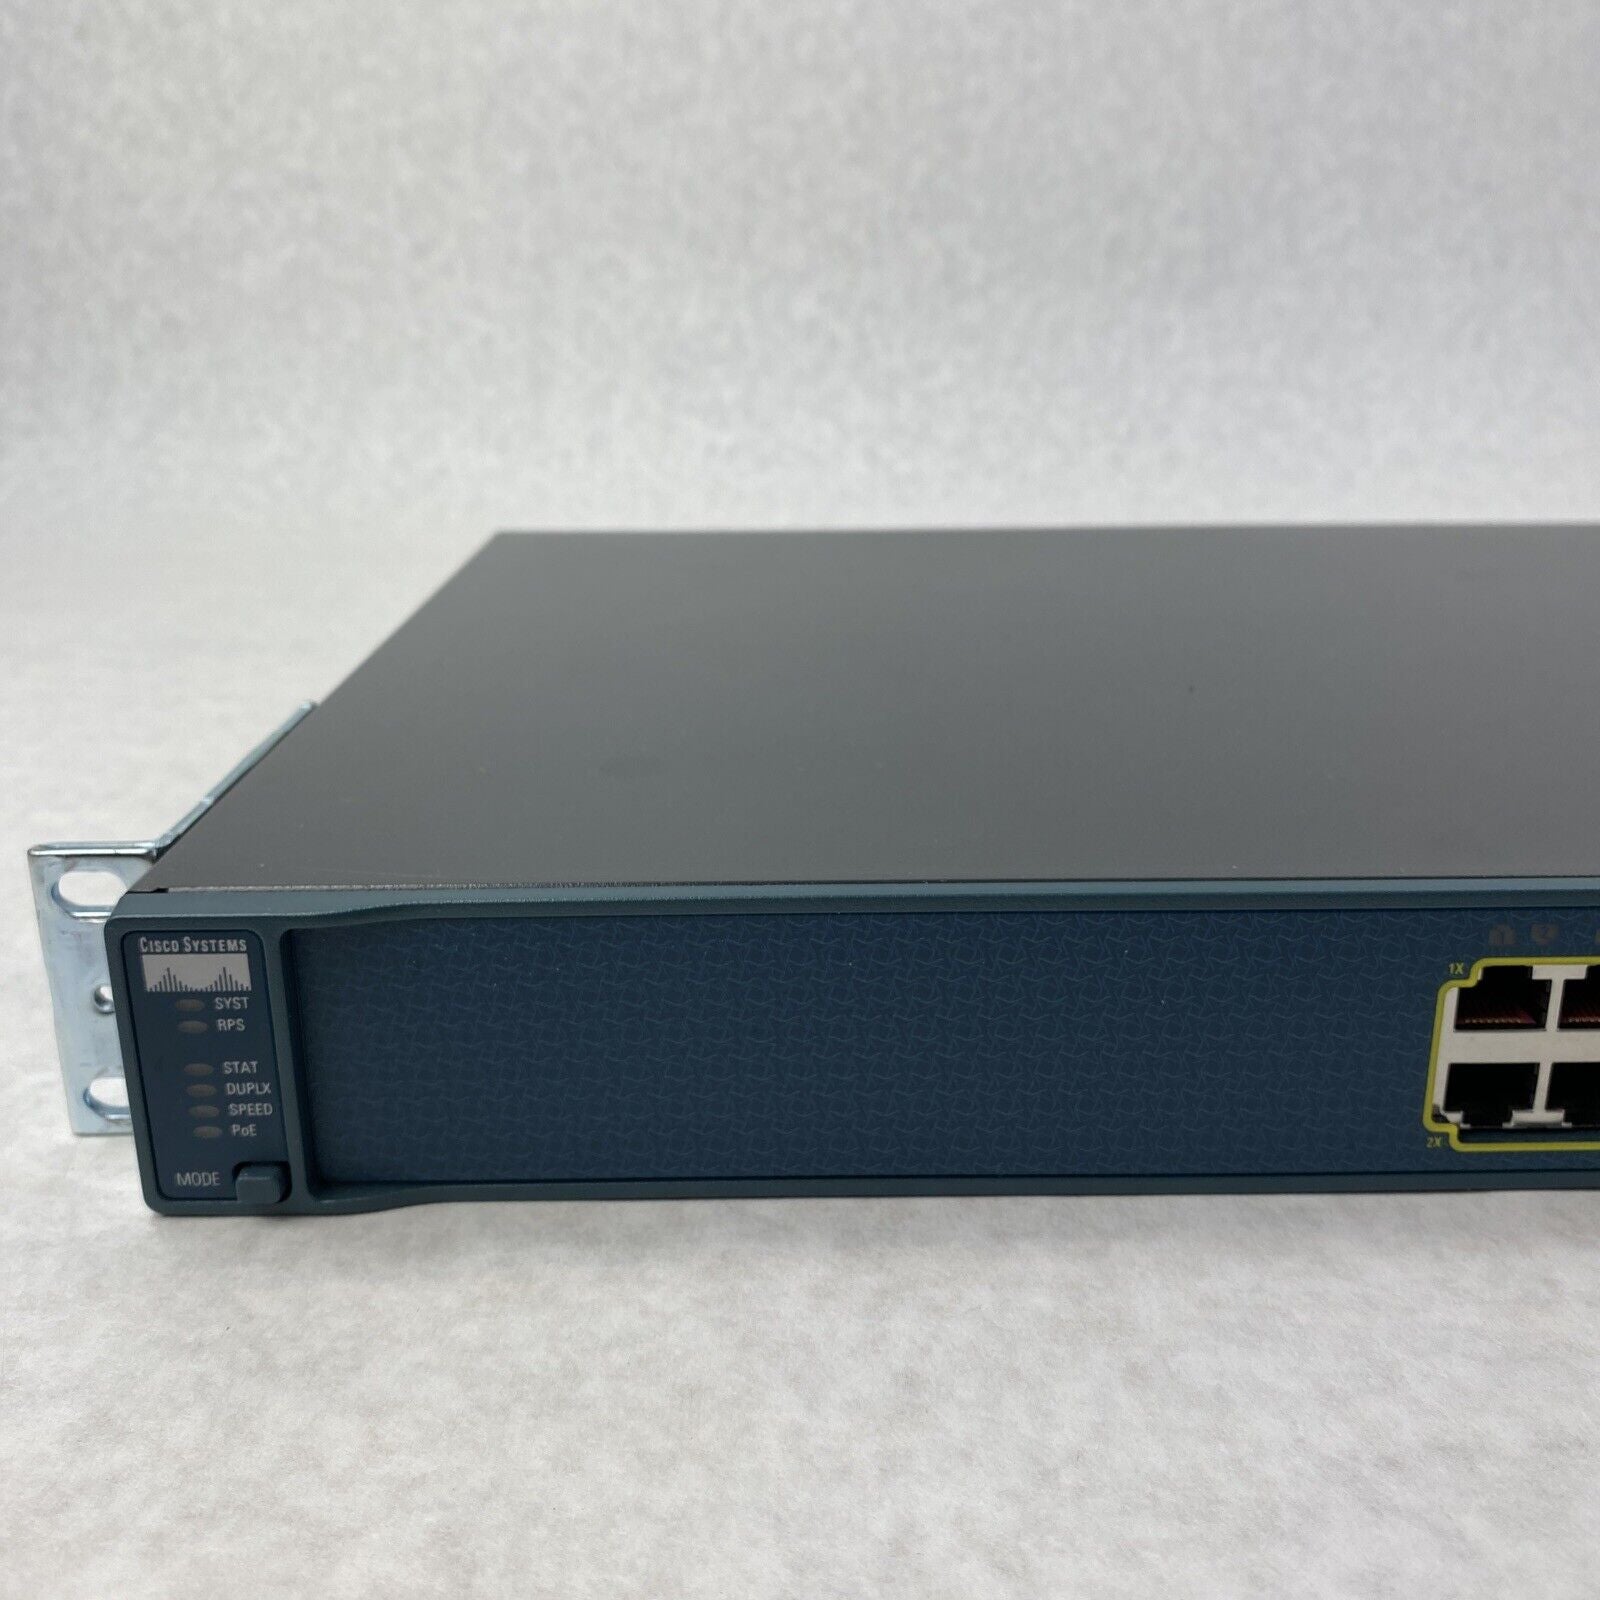 Cisco Catalyst 3560 Series 24 PoE WS-C3560-24PS-S 24-Port Networking Switch